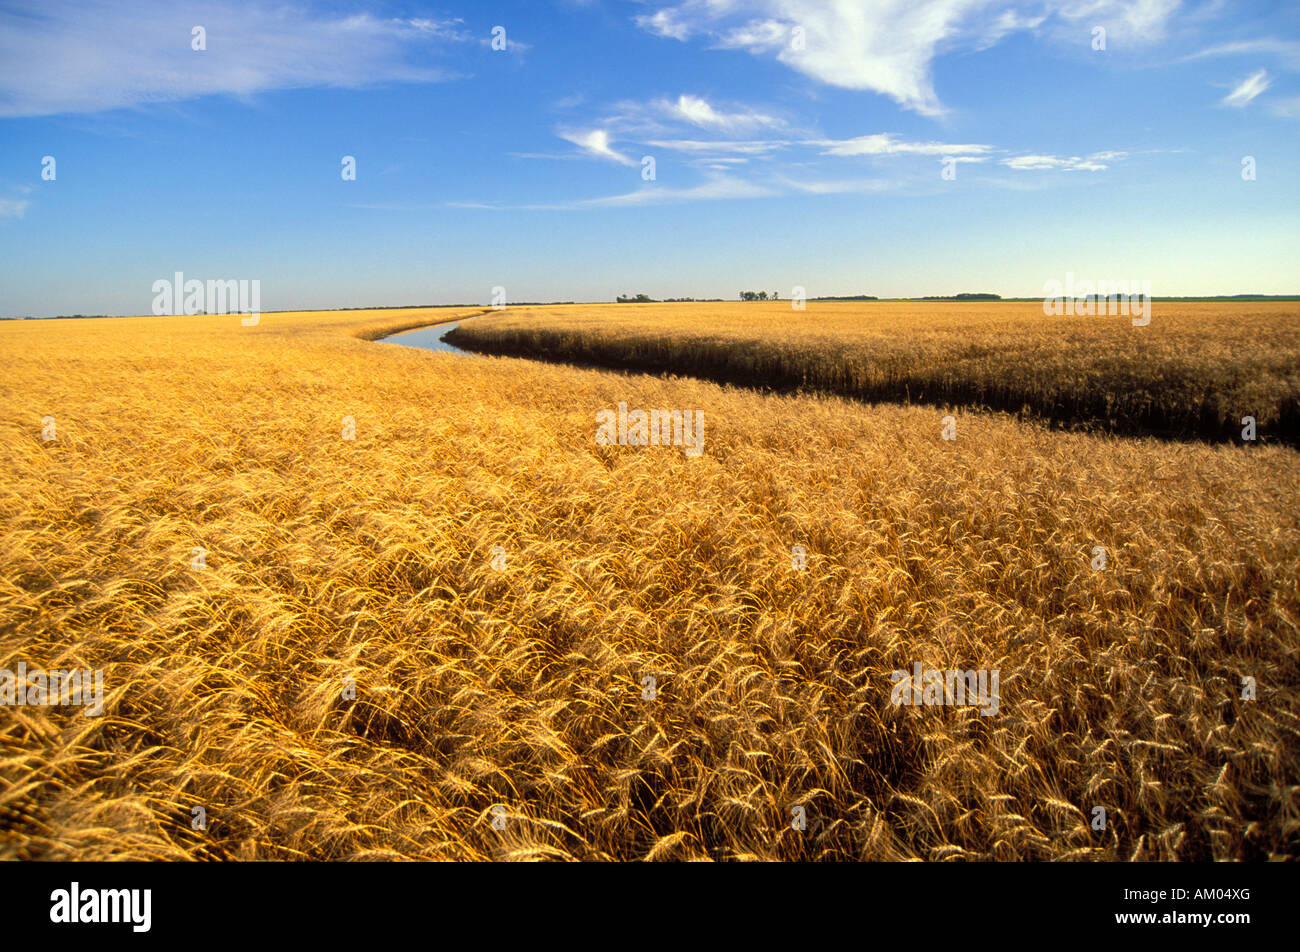 Wheat field in the Red River Valley of Minnesota Stock Photo